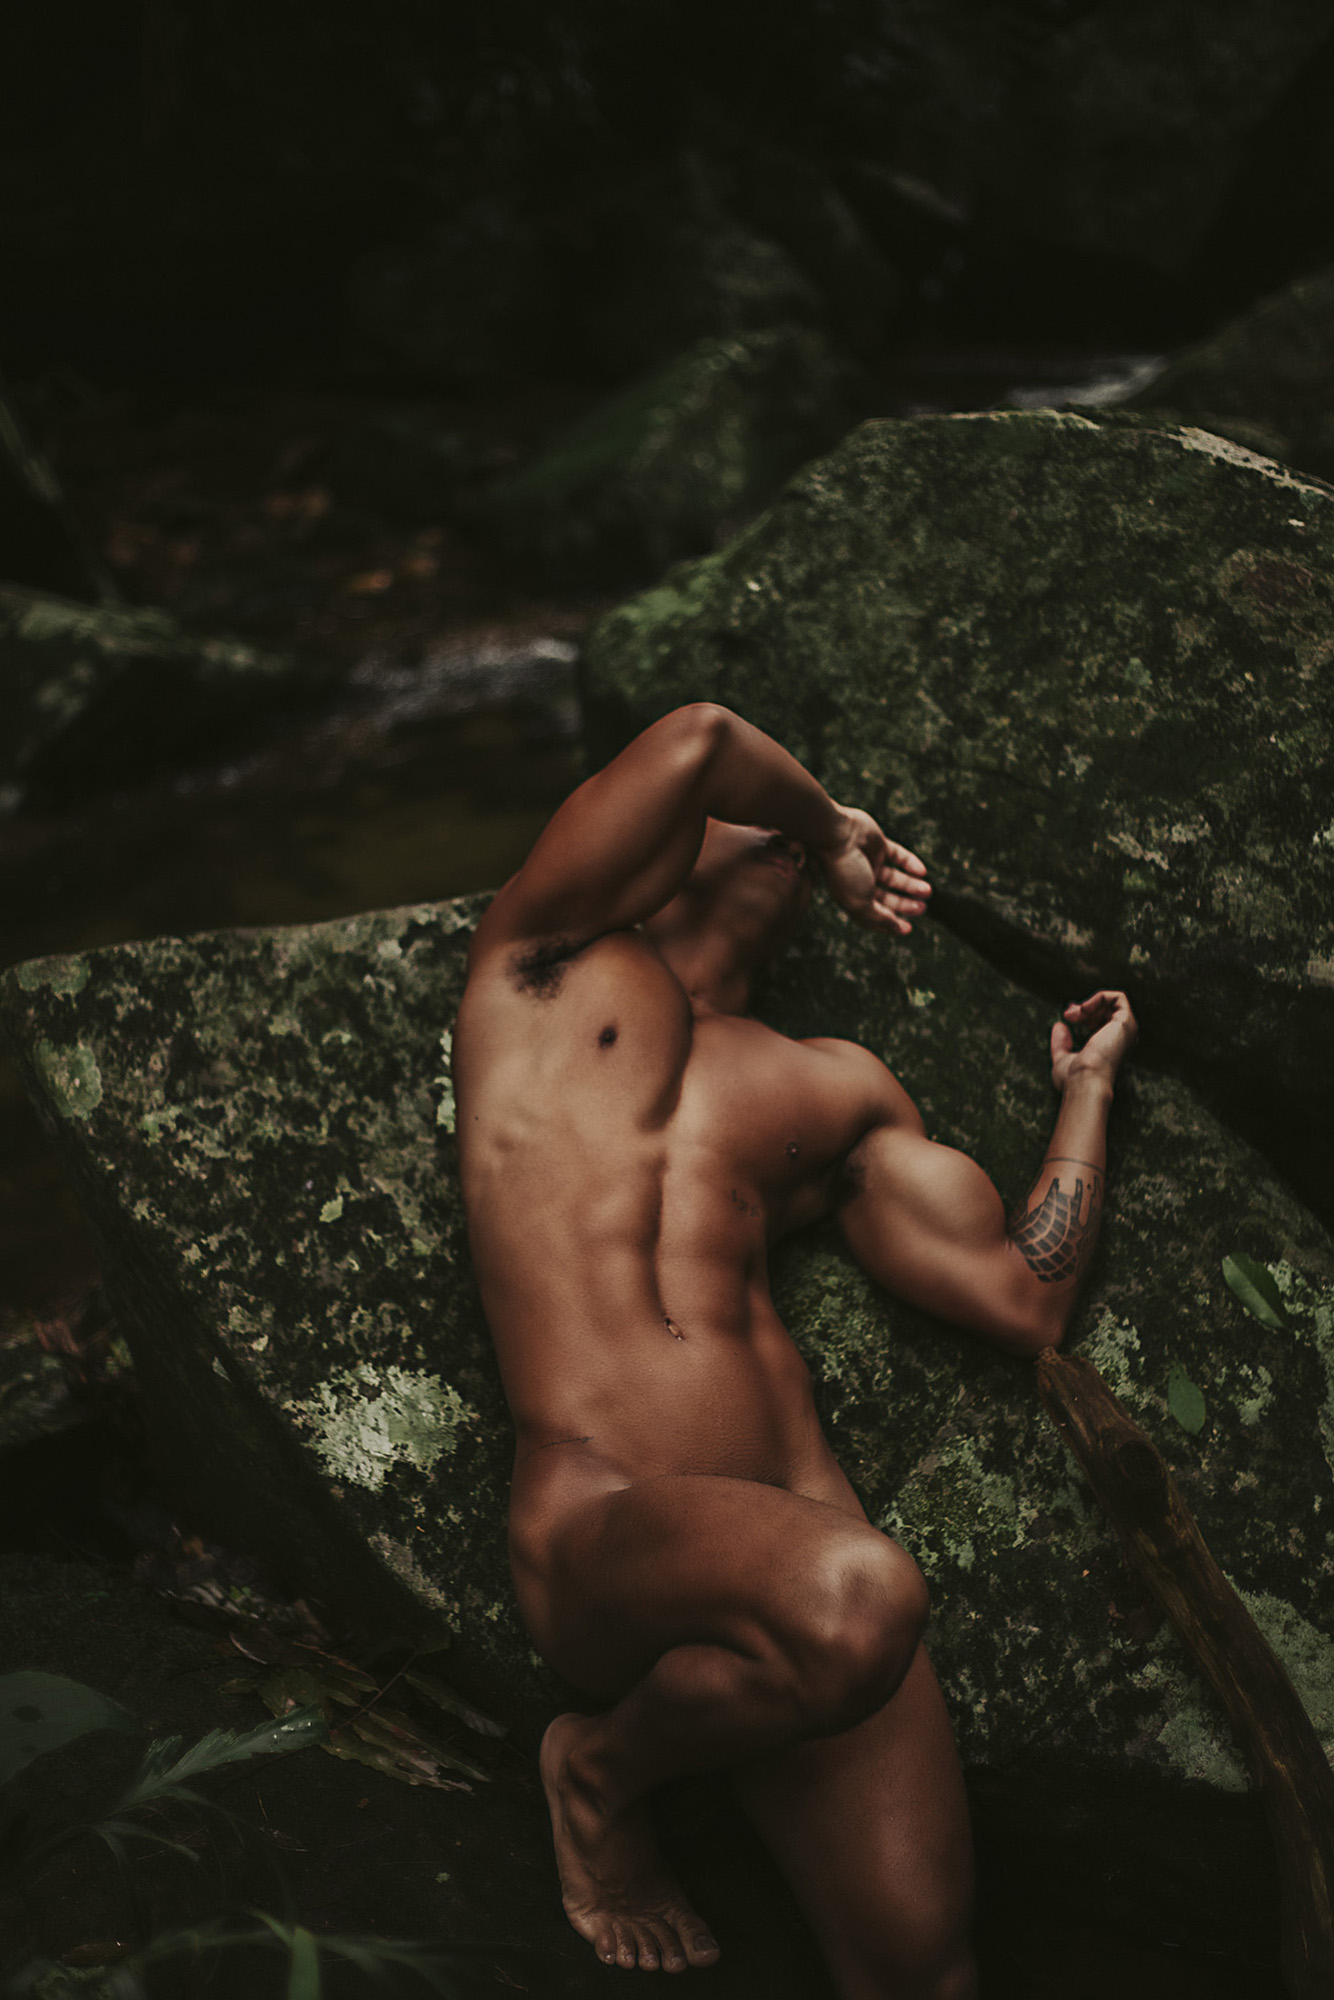 Thales Cerqueira by The Lonely Project.